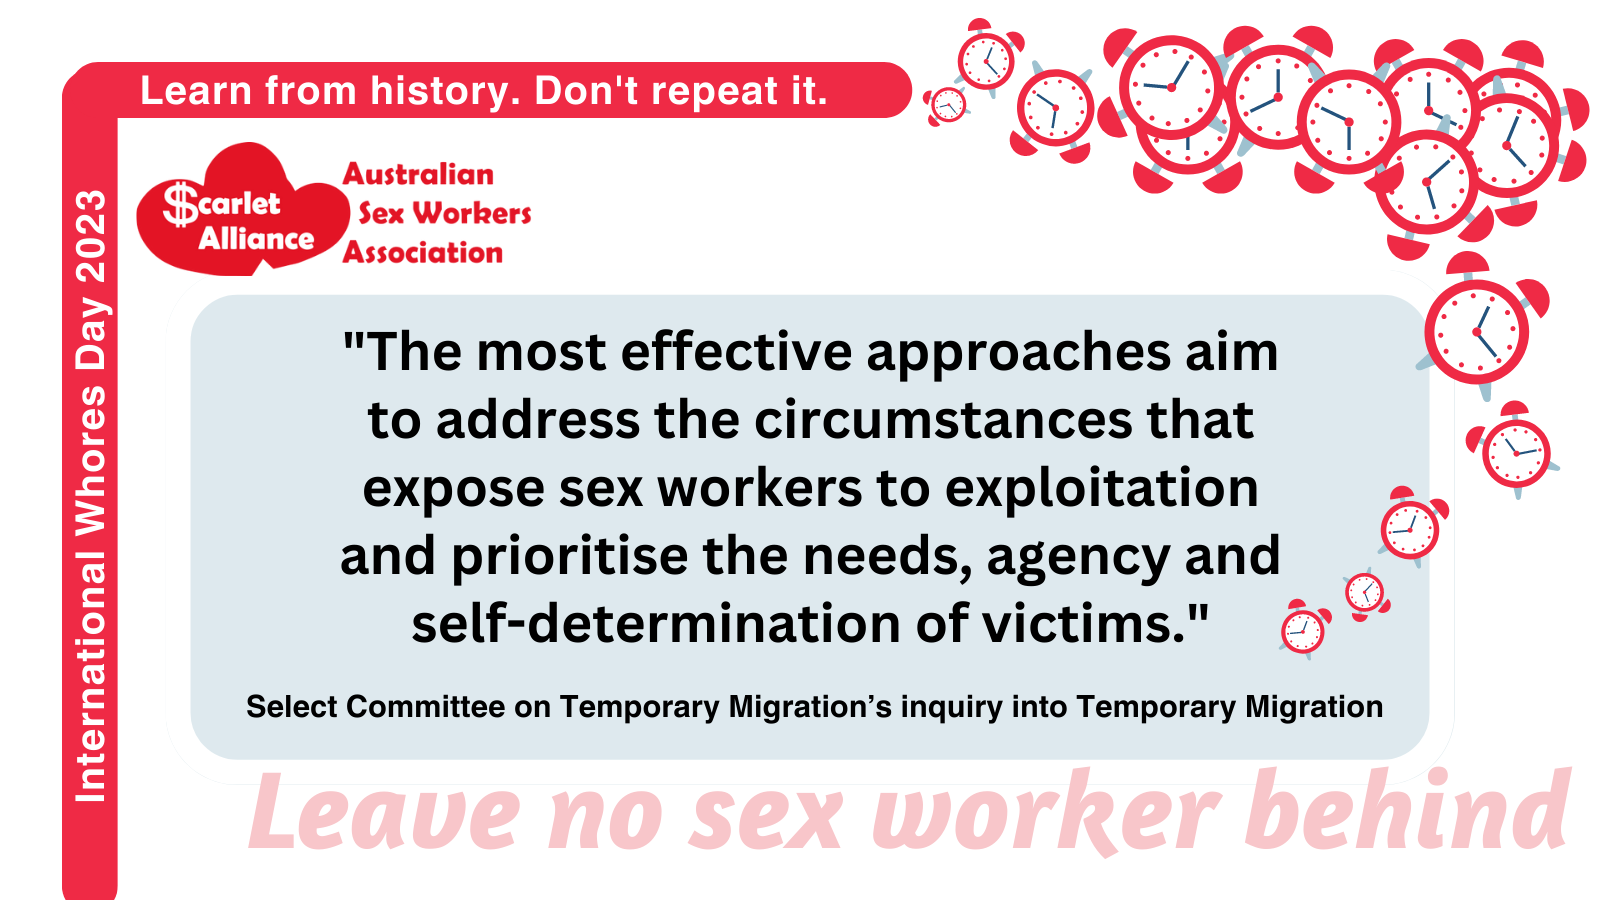 “Migrant sex workers need a human right-based response to preventing wage theft, breaches of workplace rights and conditions, modern slavery, and human trafficking. The most effective approaches aim to address the circumstances that expose sex workers to exploitation and prioritise the needs, agency and self-determination of victims over criminal prosecutions and increased surveillance.”